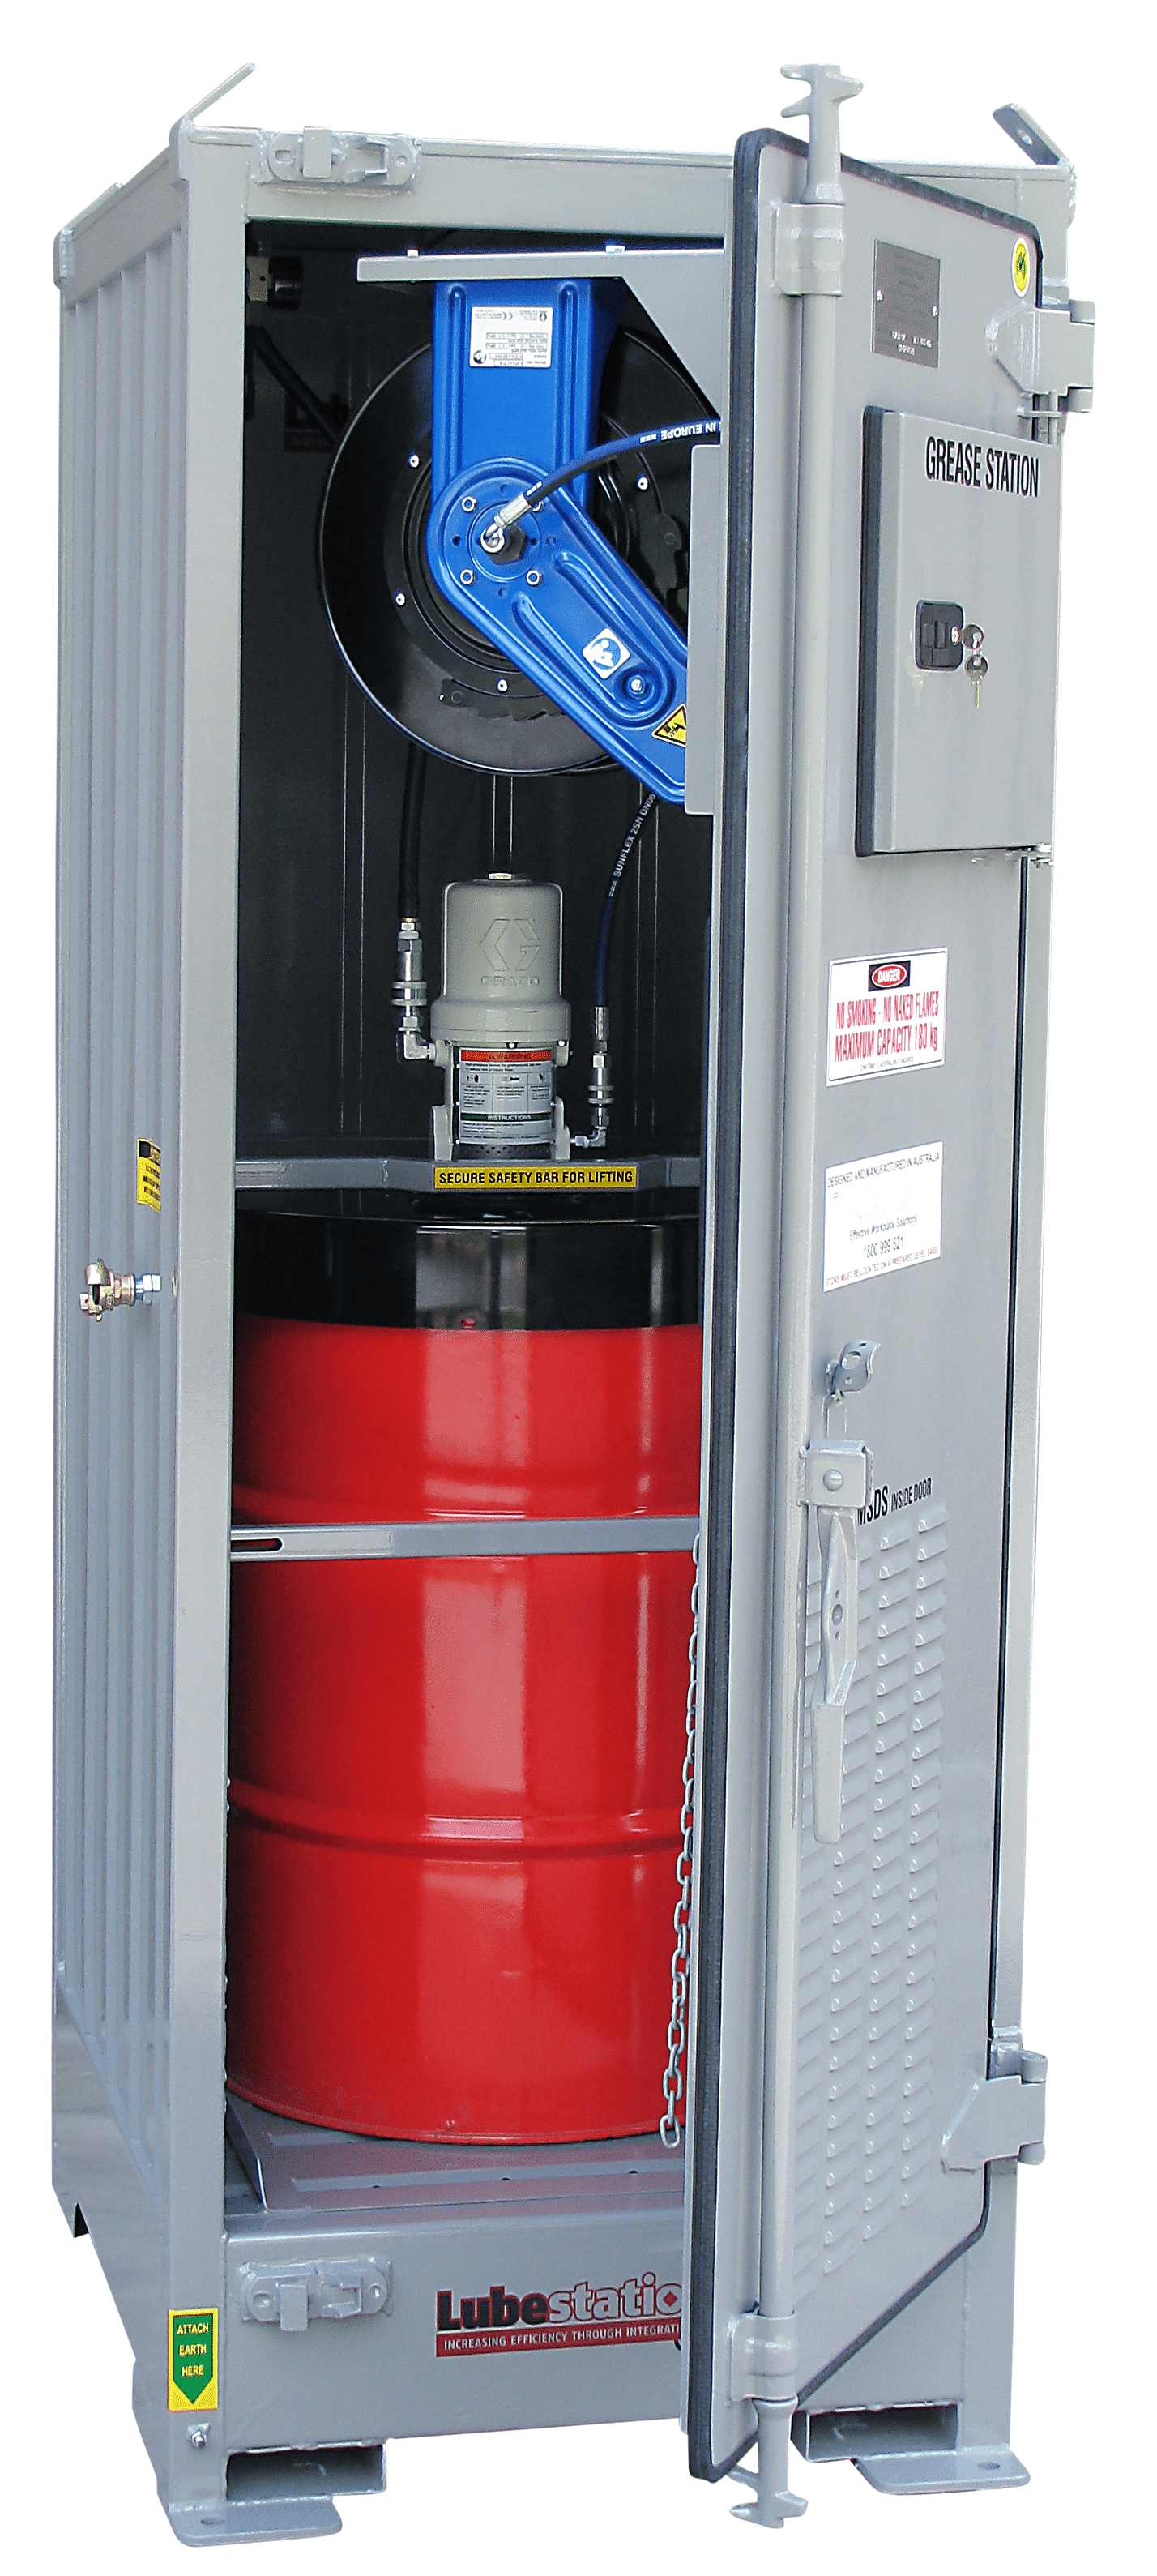 Portable high-pressure grease dispensing system.